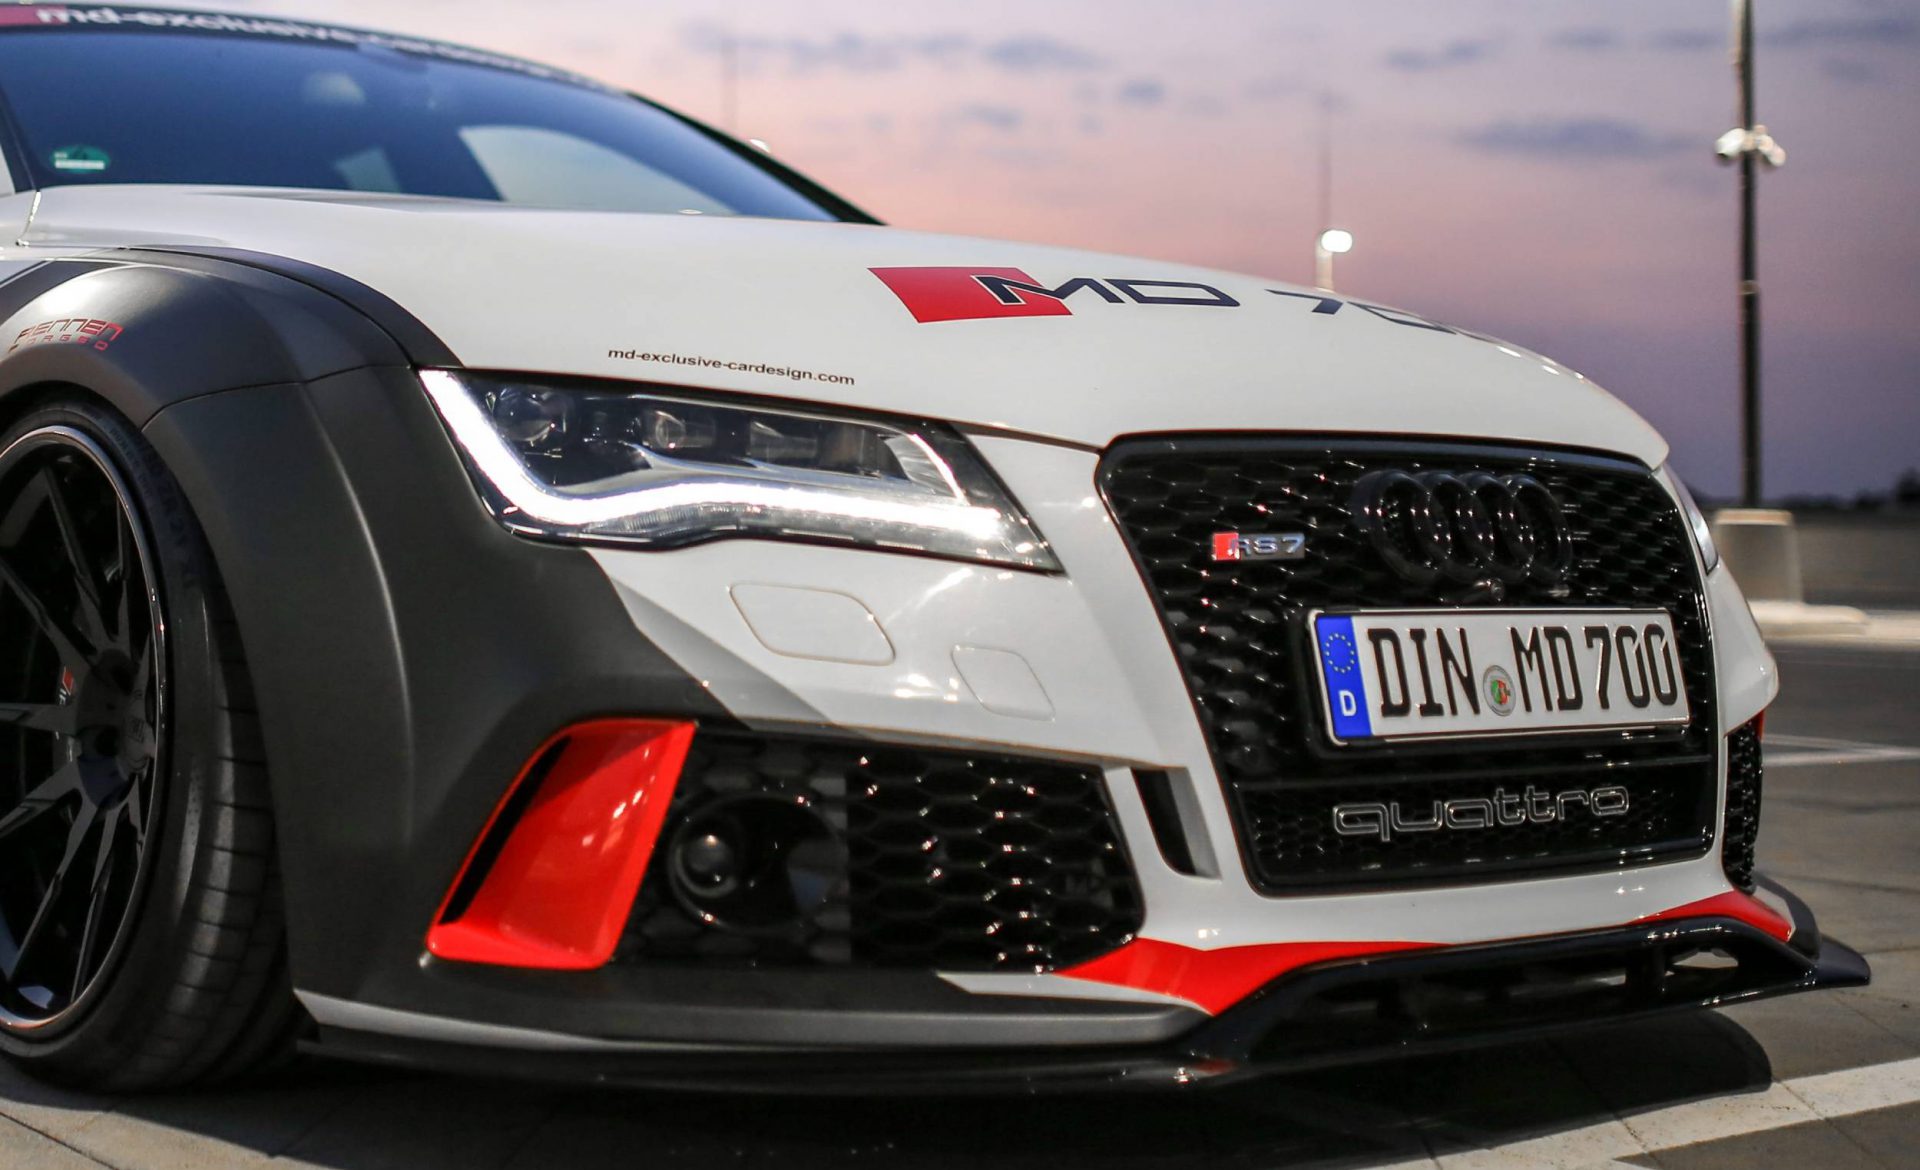 PD700R Front Add-On Spoiler for Audi A7/S7/RS7 C7